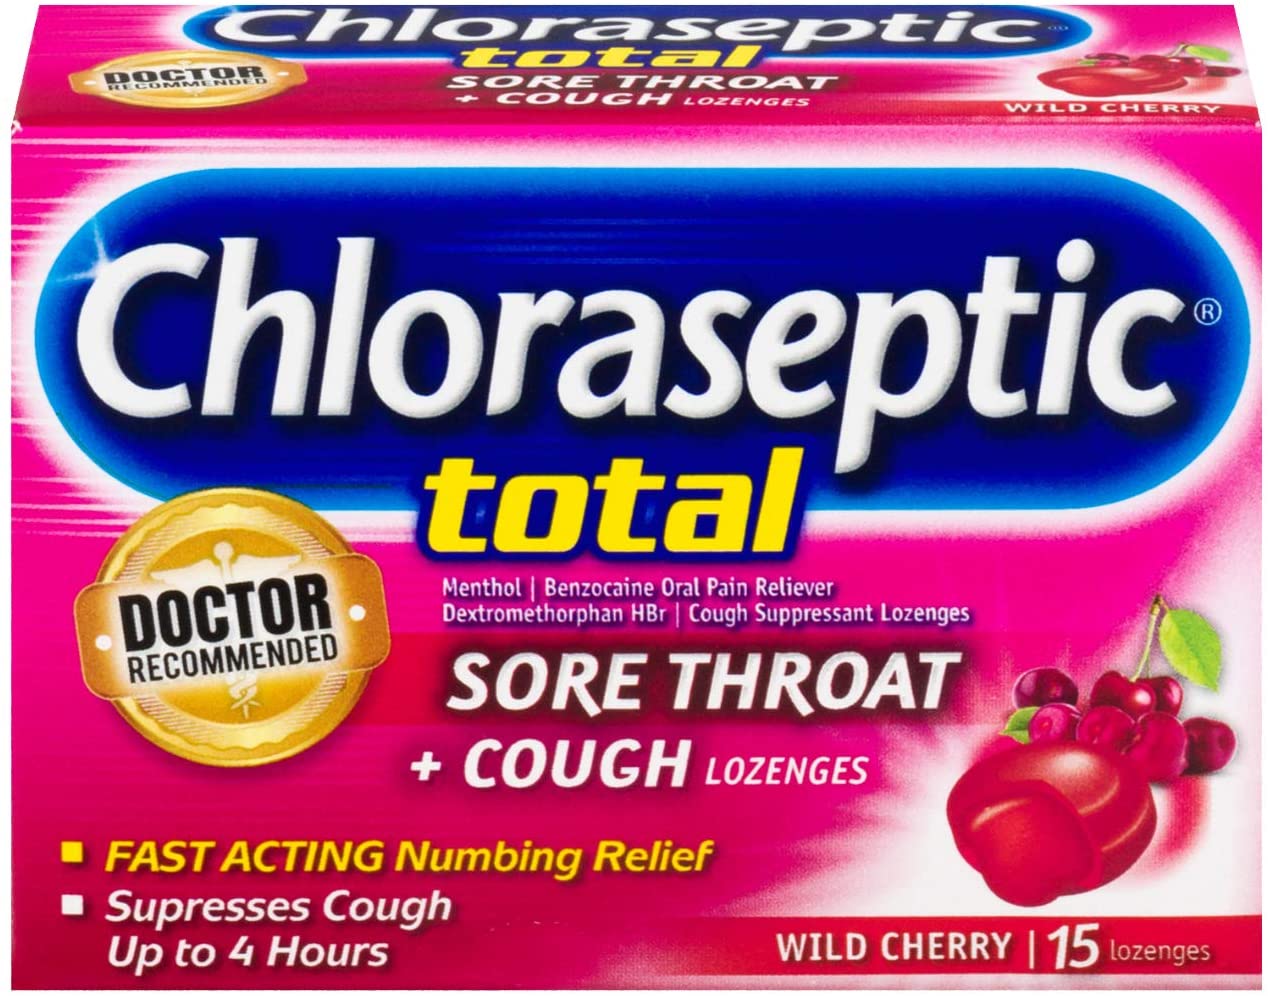 Chloraseptic Total Sore Throat + Cough Lozenges, Wild Cherry Flavor, 15 Count - $2.47 - Free Shipping with Amazon